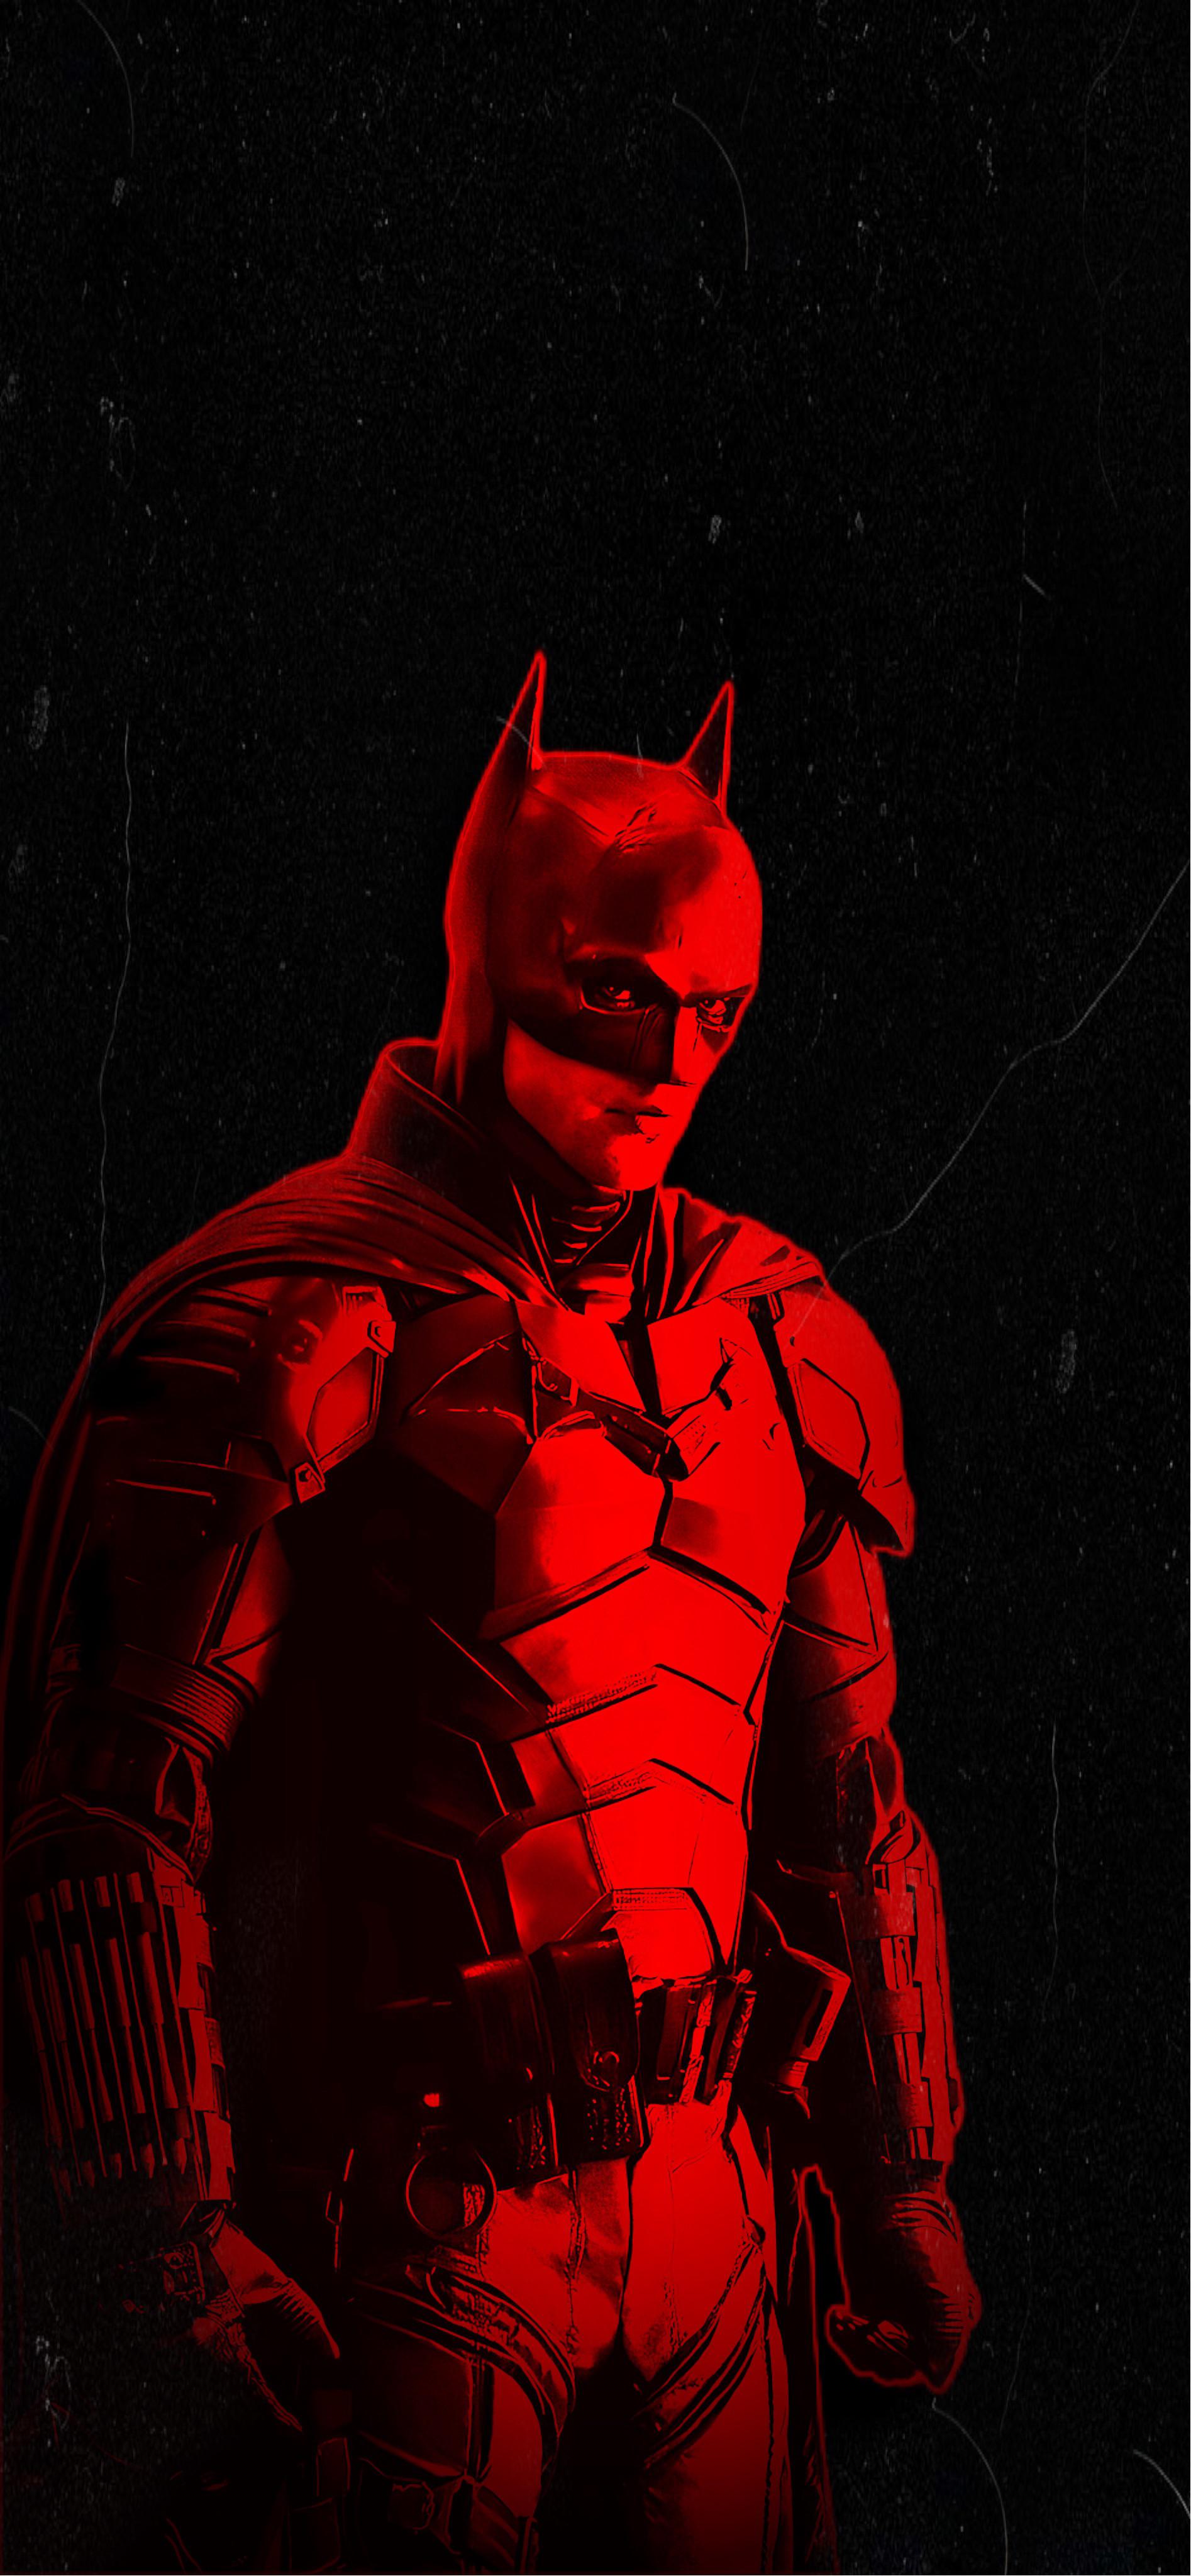 Here's some Batman wallpaper I made for IOS 16